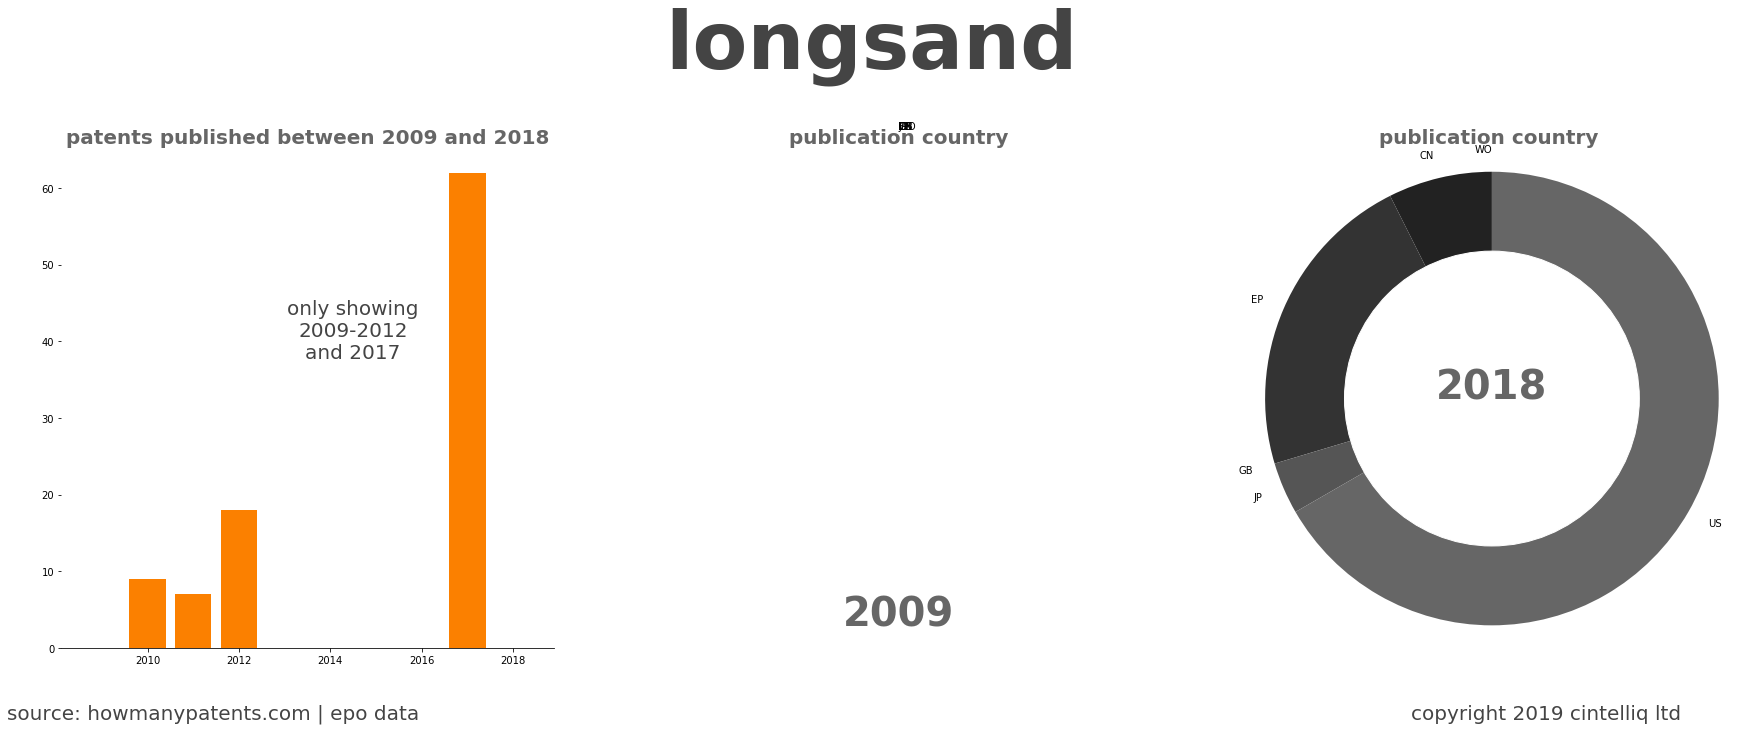 summary of patents for Longsand